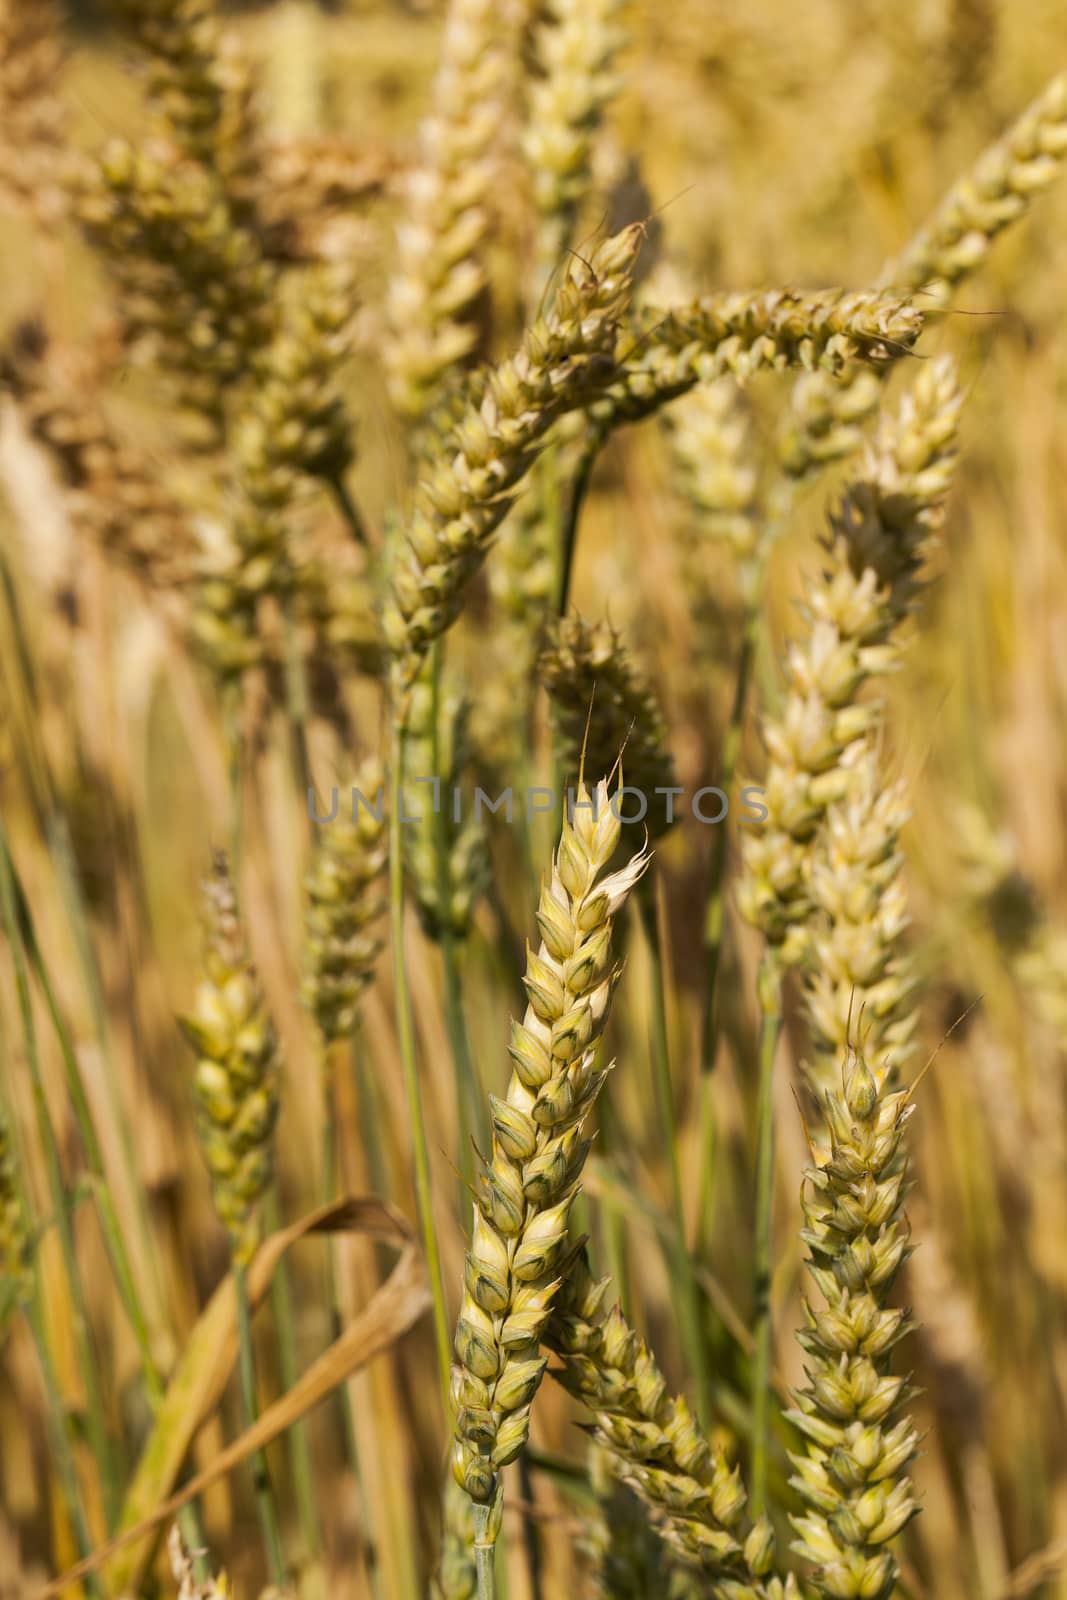  the mature ears of cereals photographed by a close up